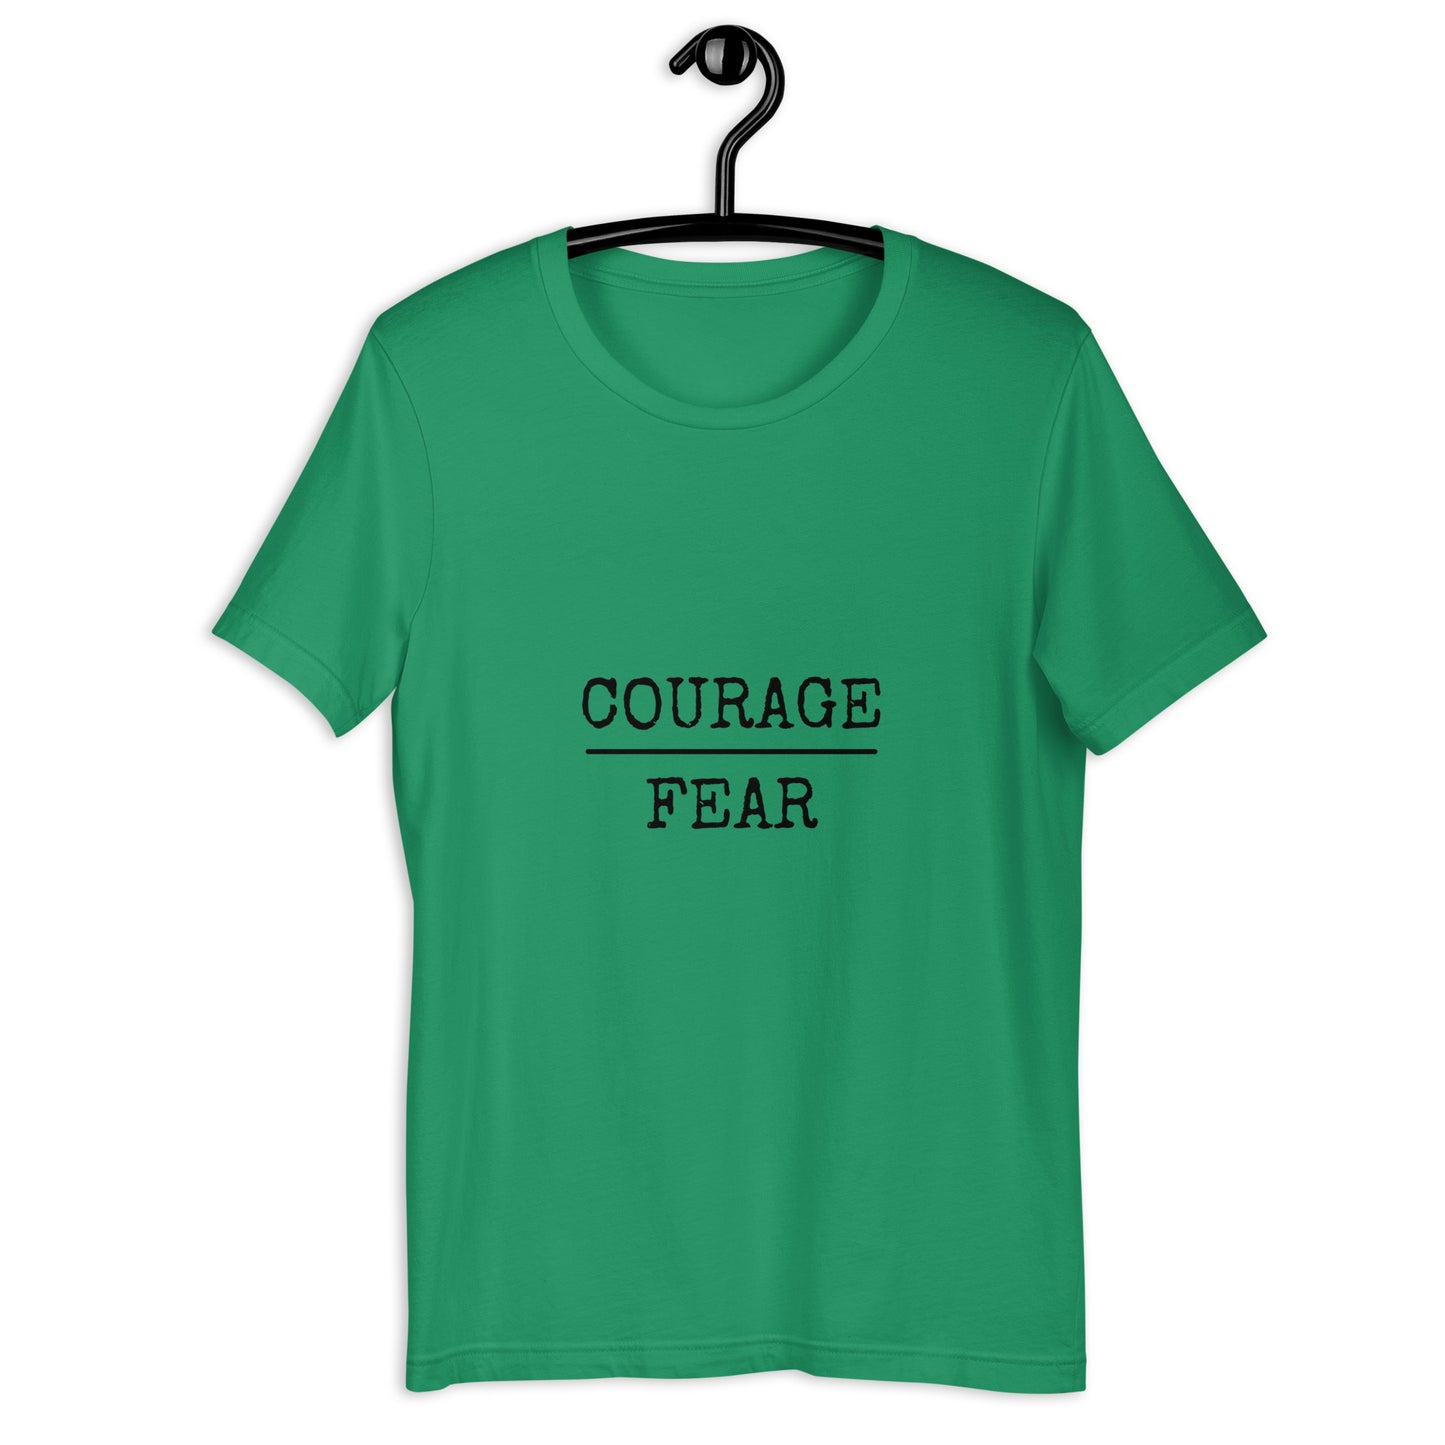 COURAGE/FEAR T-shirt